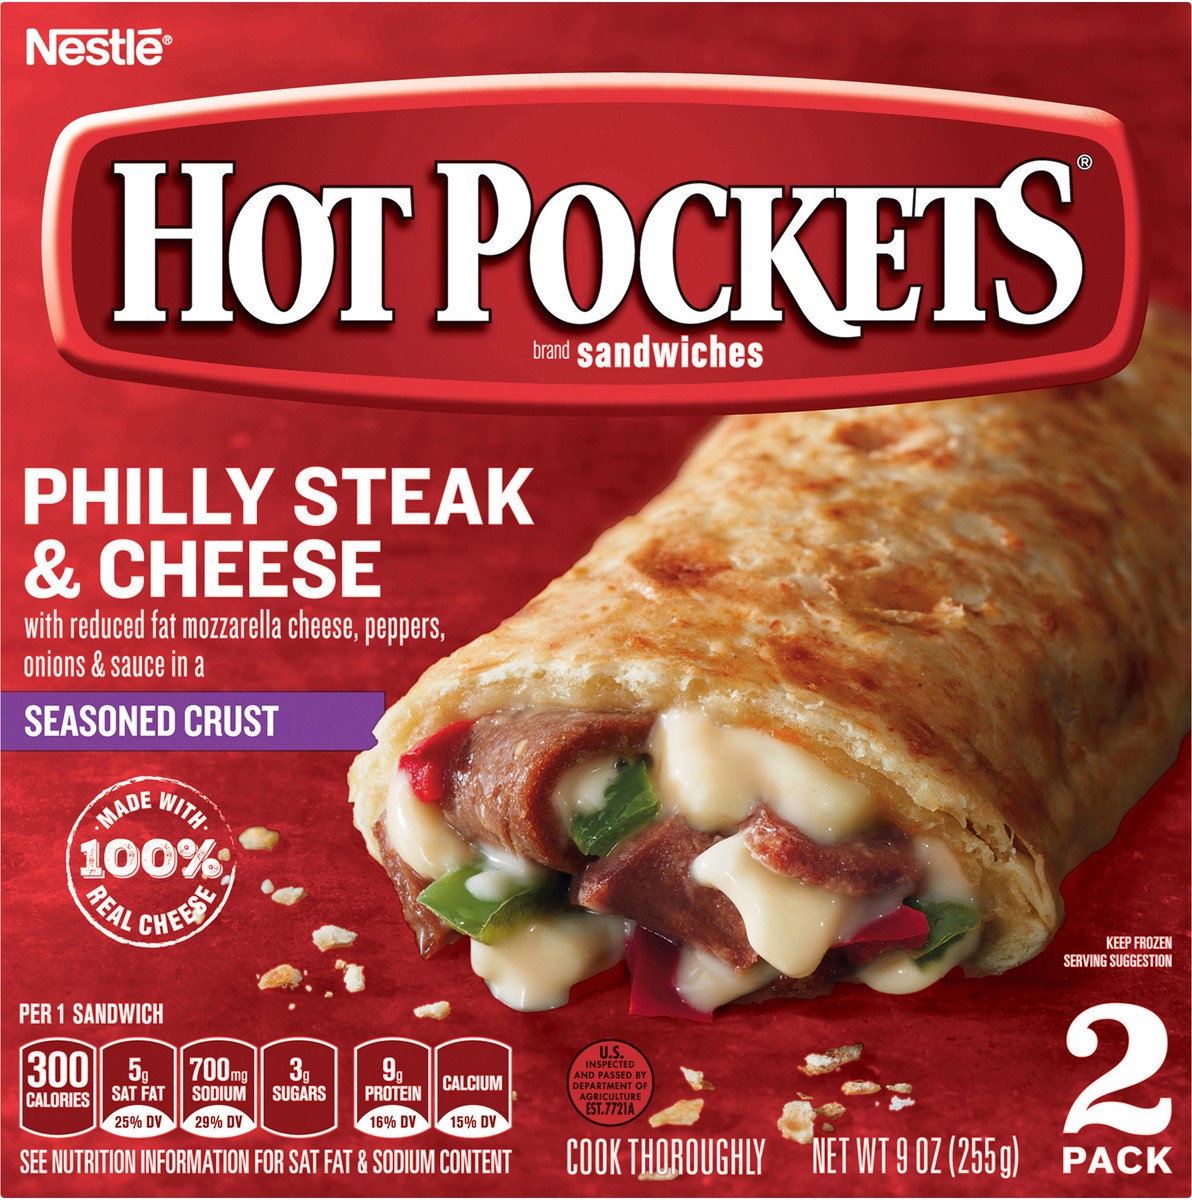 slide 6 of 9, Hot Pockets Philly Steak & Cheese Frozen Snacks in a Seasoned Crust, Philly Cheesesteak Made with Real Reduced Fat Mozzarella Cheese, 2 Count Frozen Sandwiches, 9 oz